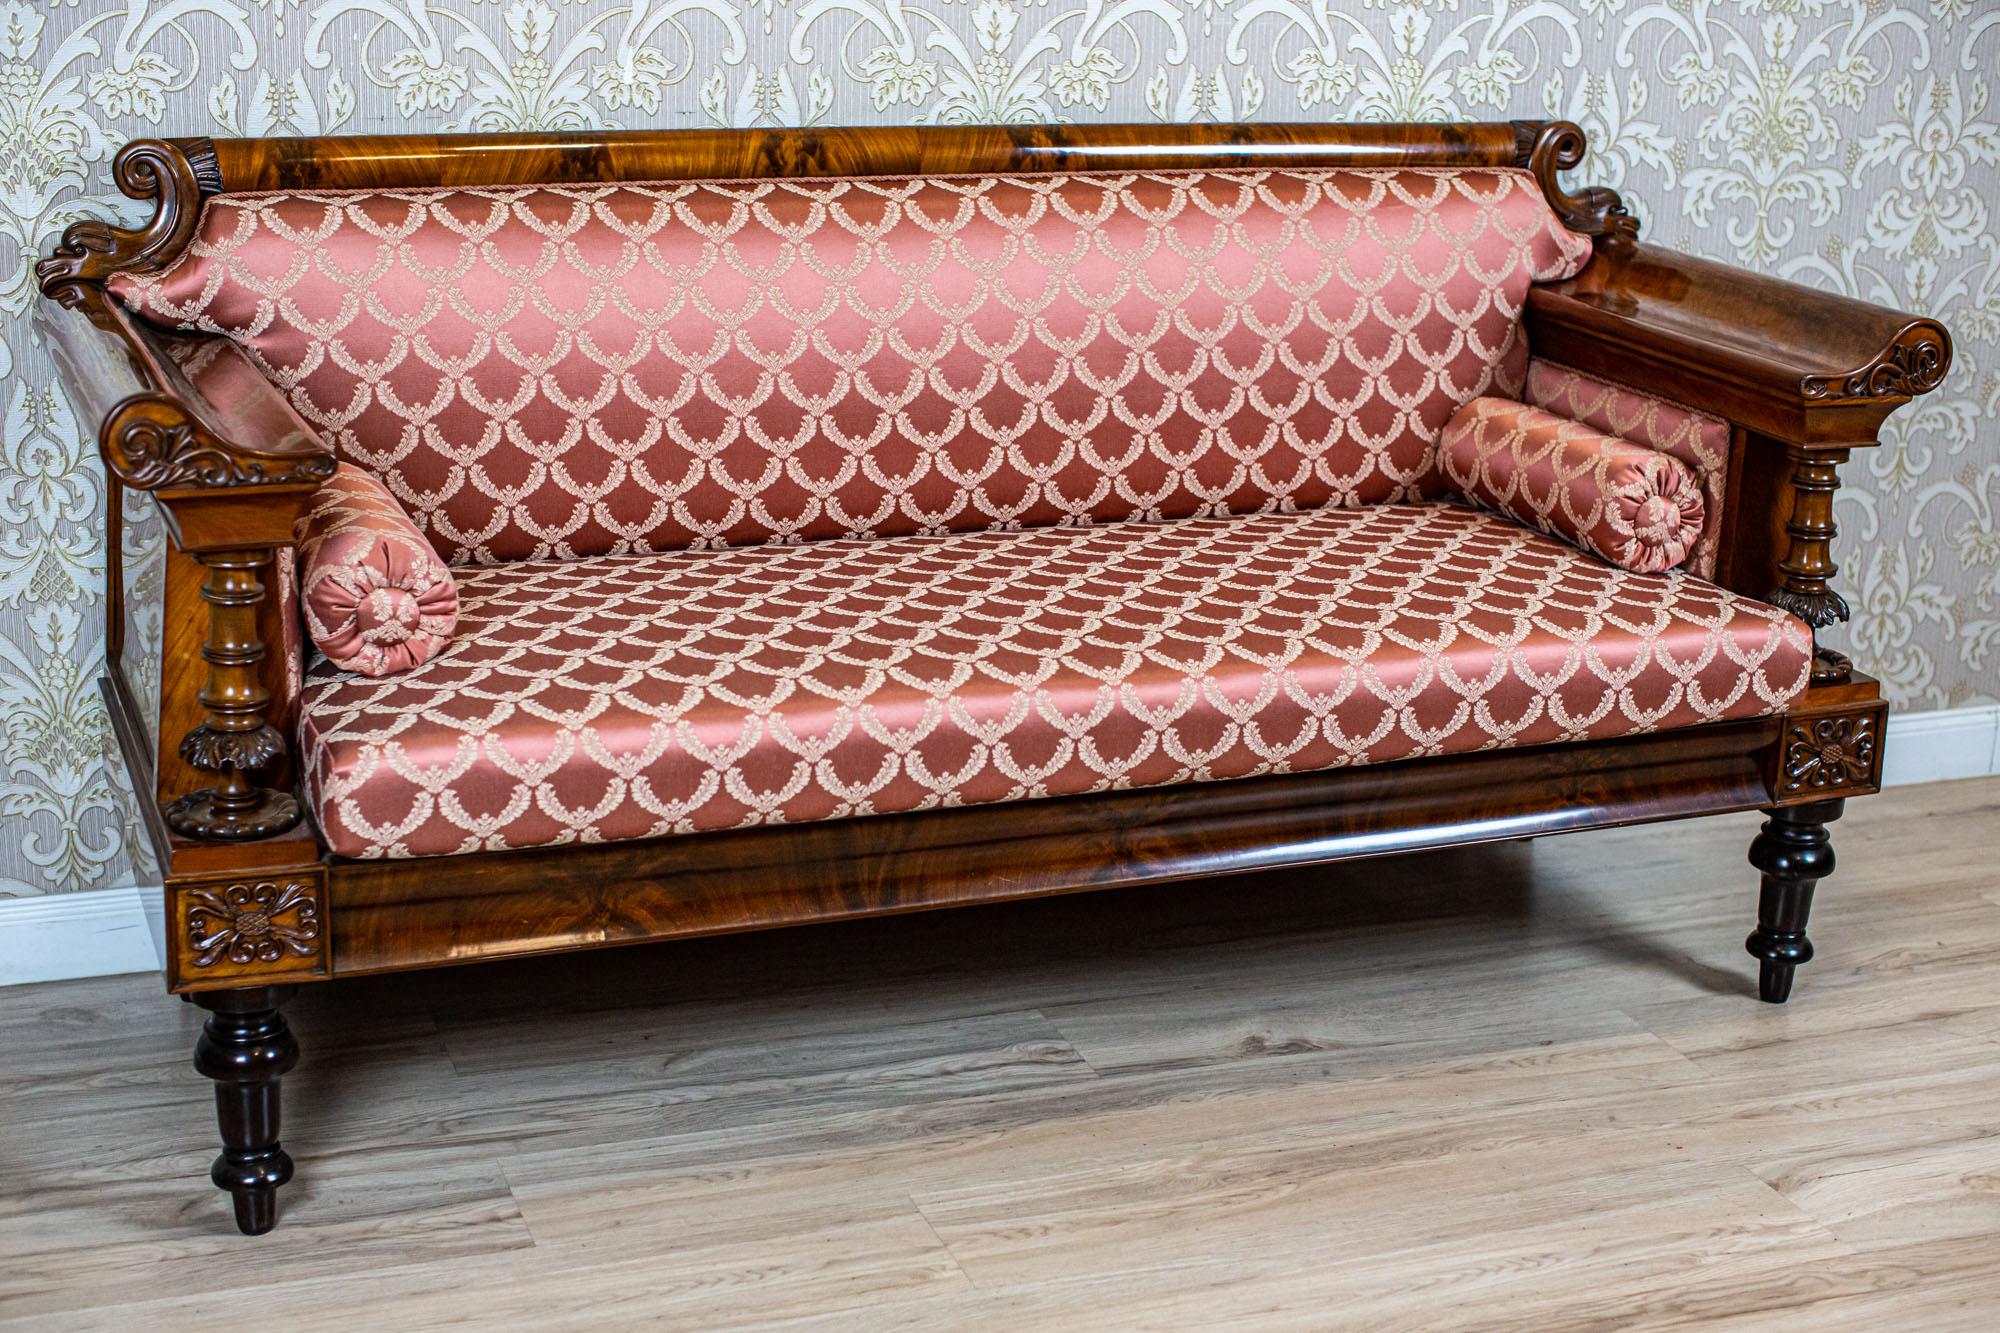 19th Century Empire Sofa in New Pink Upholstery

We present you this piece of furniture after thorough renovation. The upholstery is new.